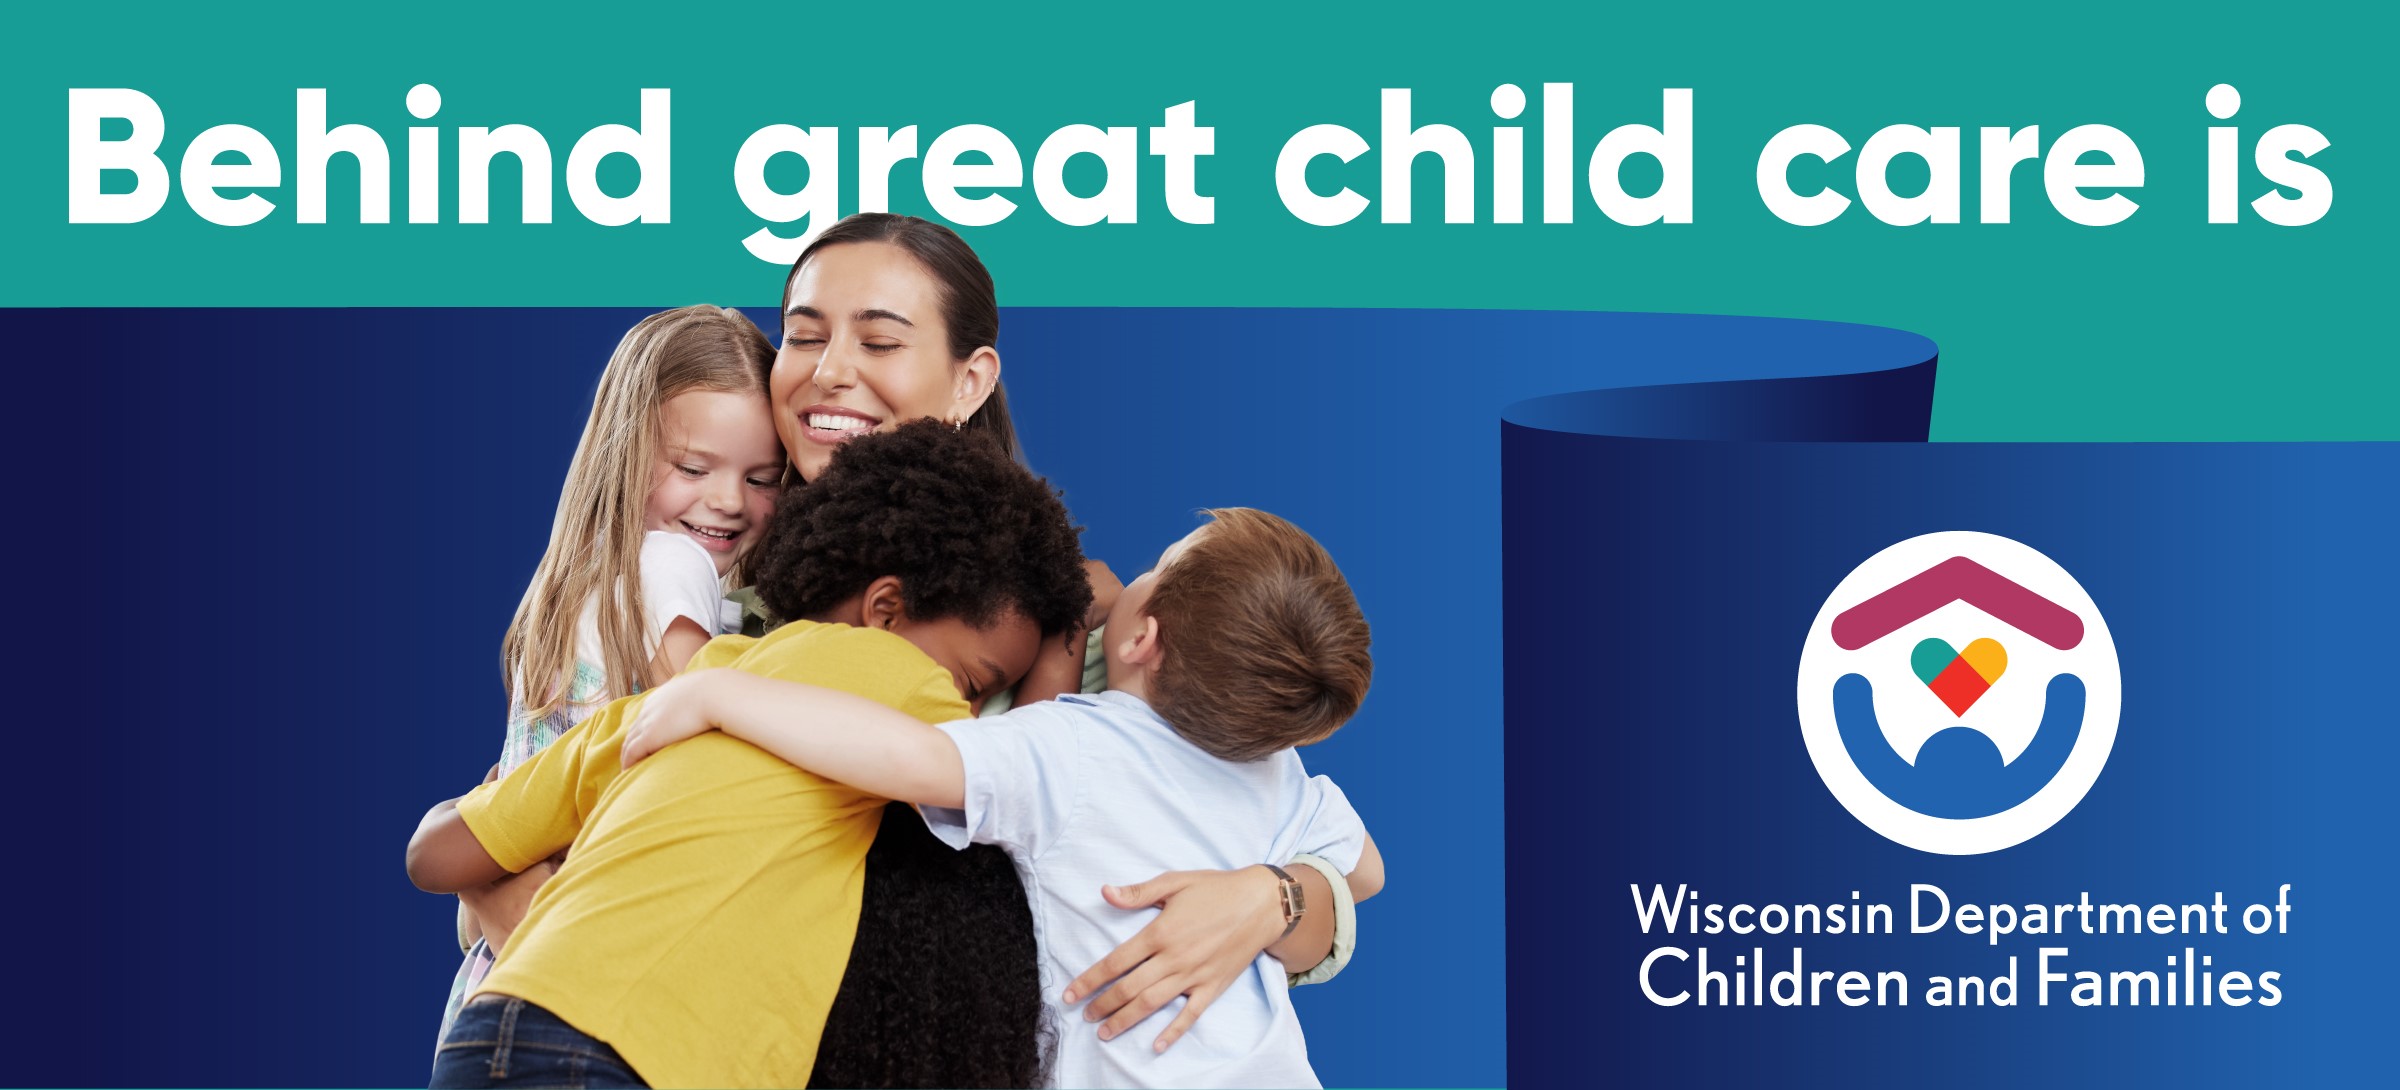 behind great child care is Wisconsin Department of Children and Families